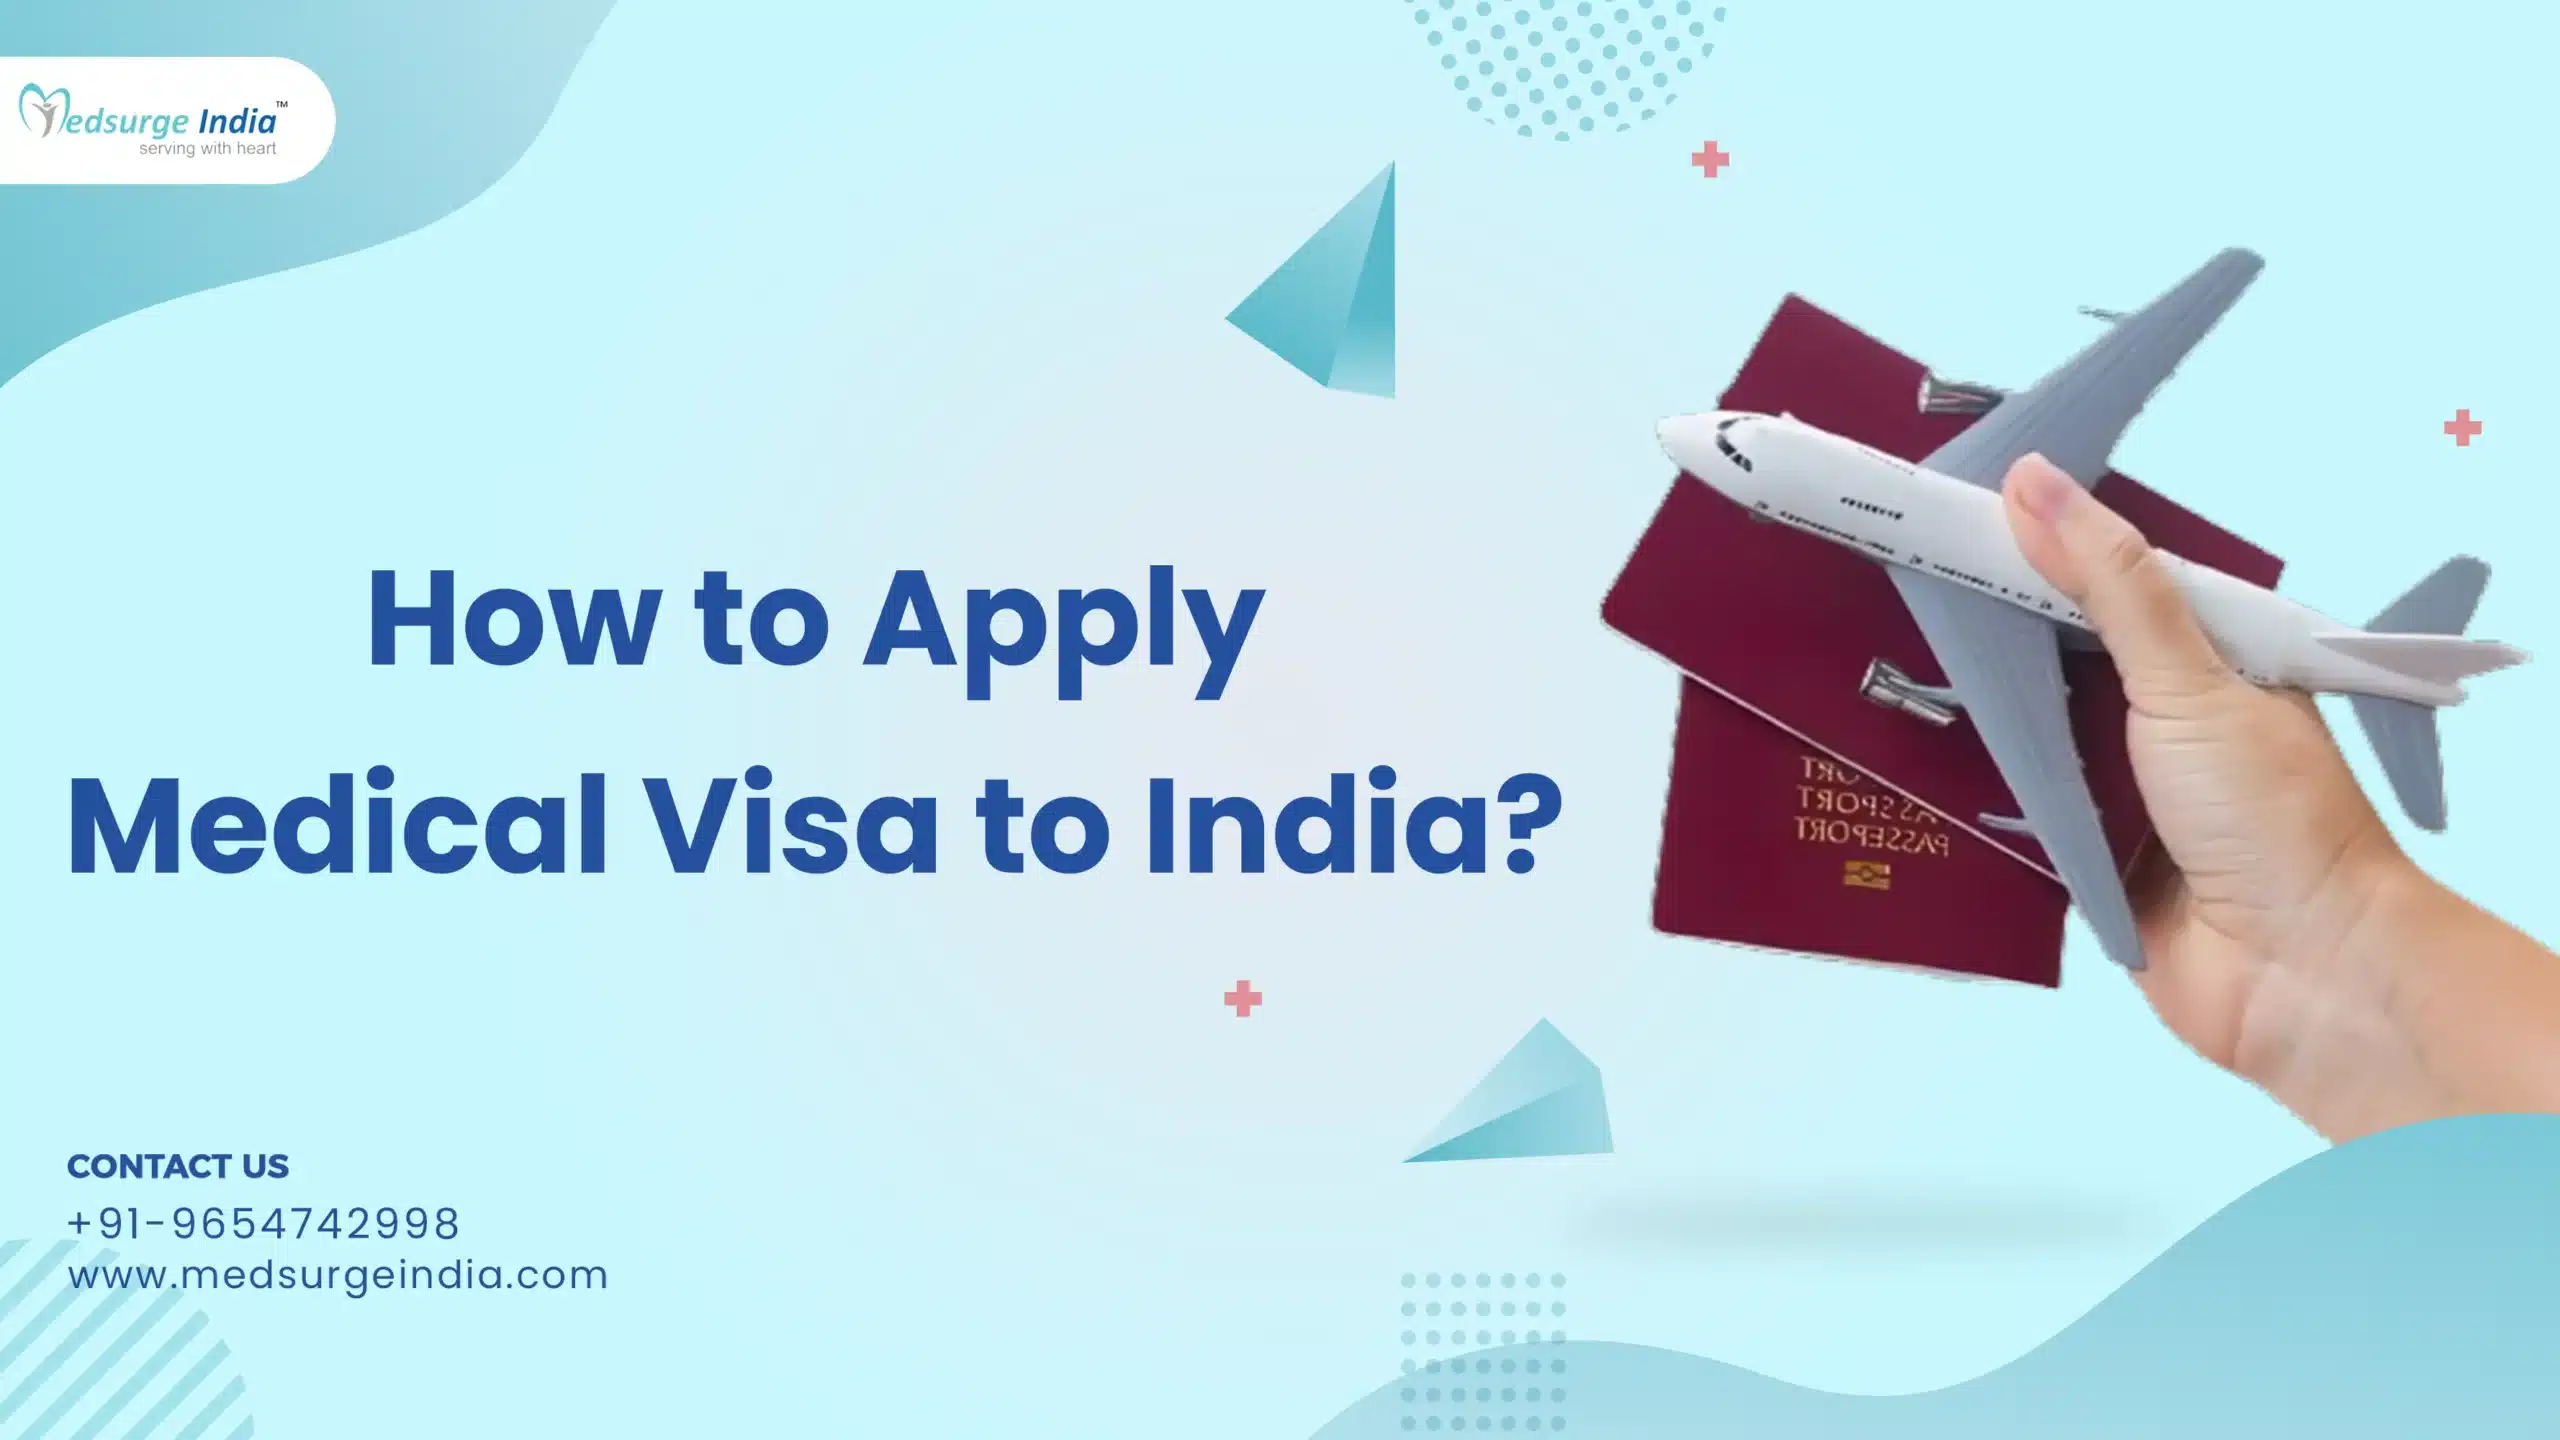 How to Apply Medical Visa to India?